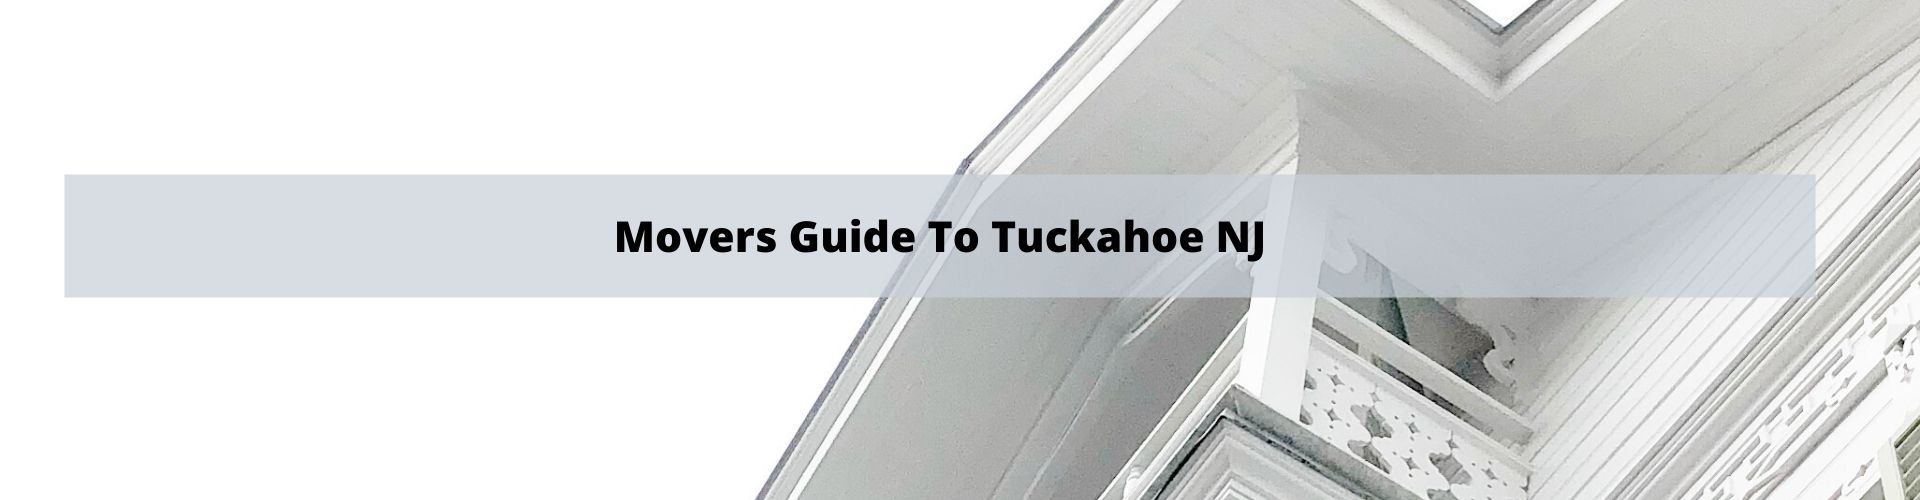 Mover's Guide to Tuckahoe NJ